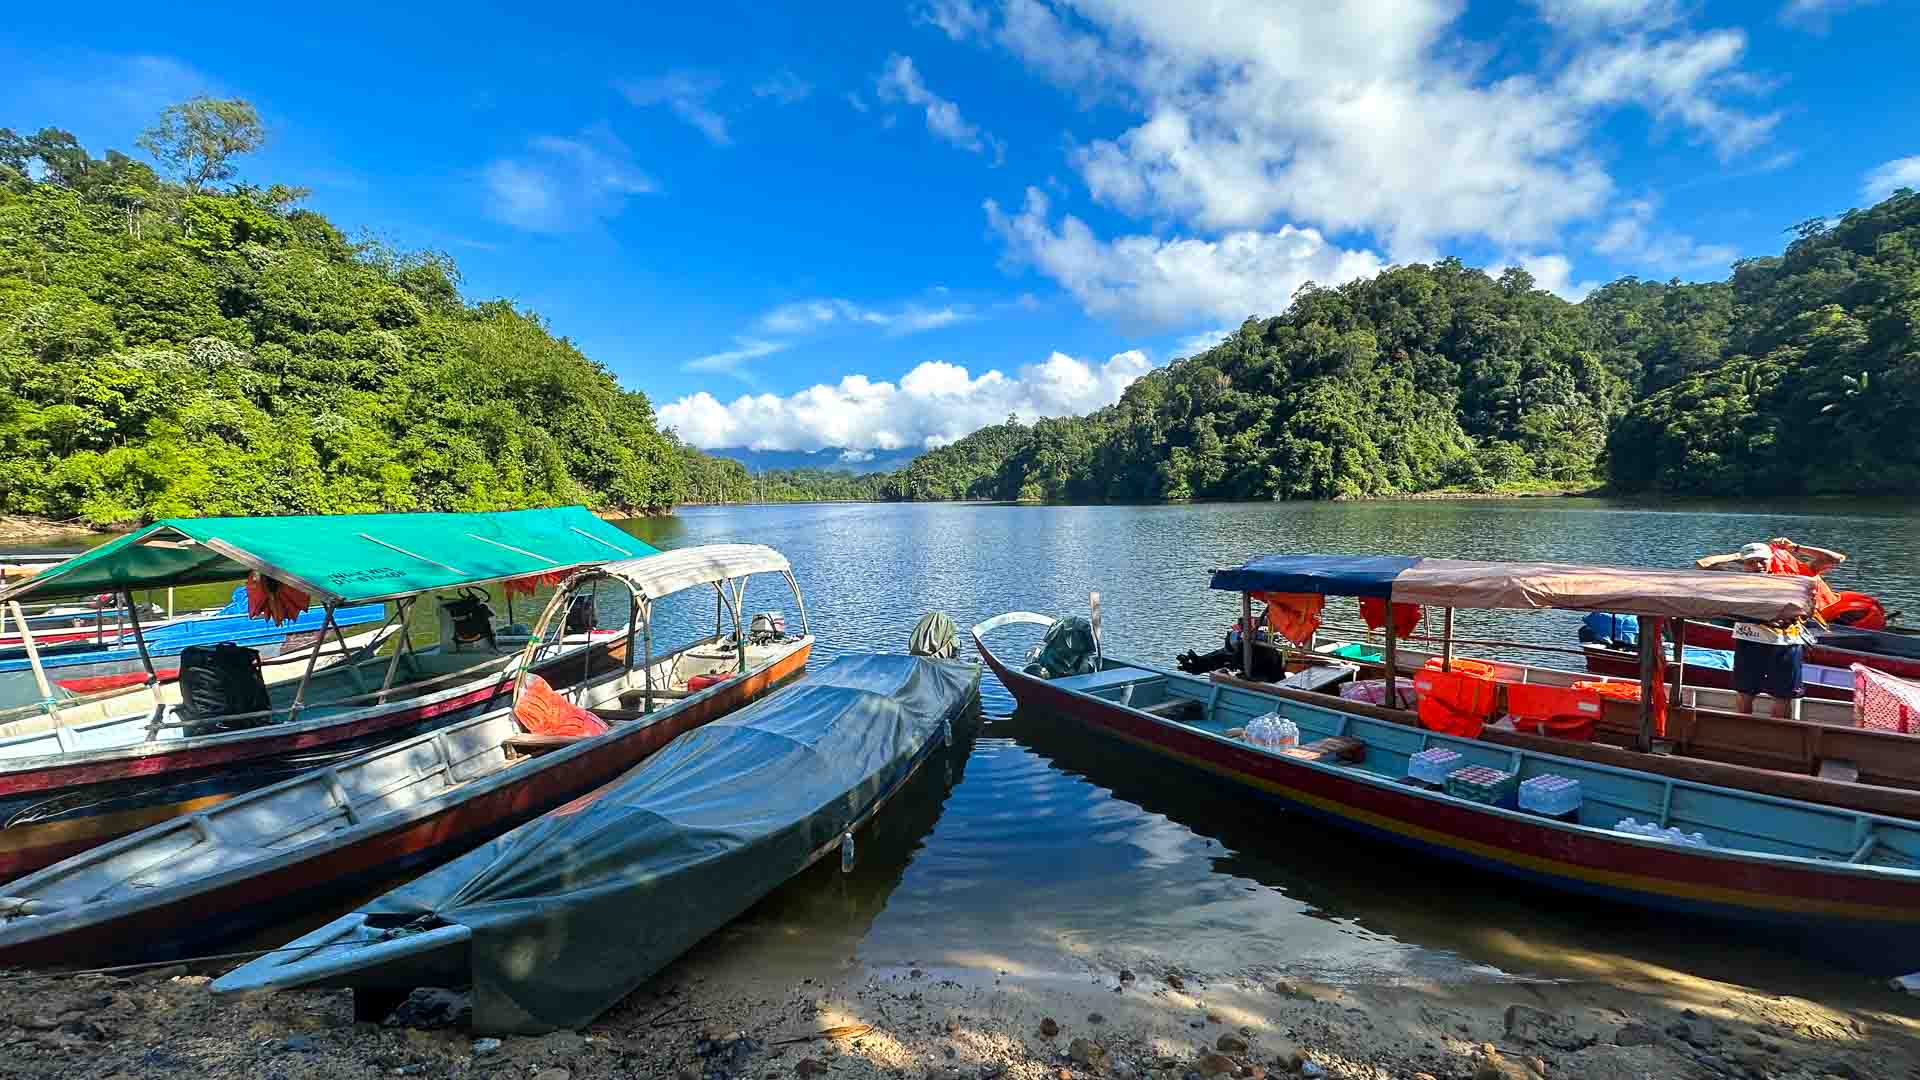 Boats on the Bengoh resevoir in Sarawak Borneo